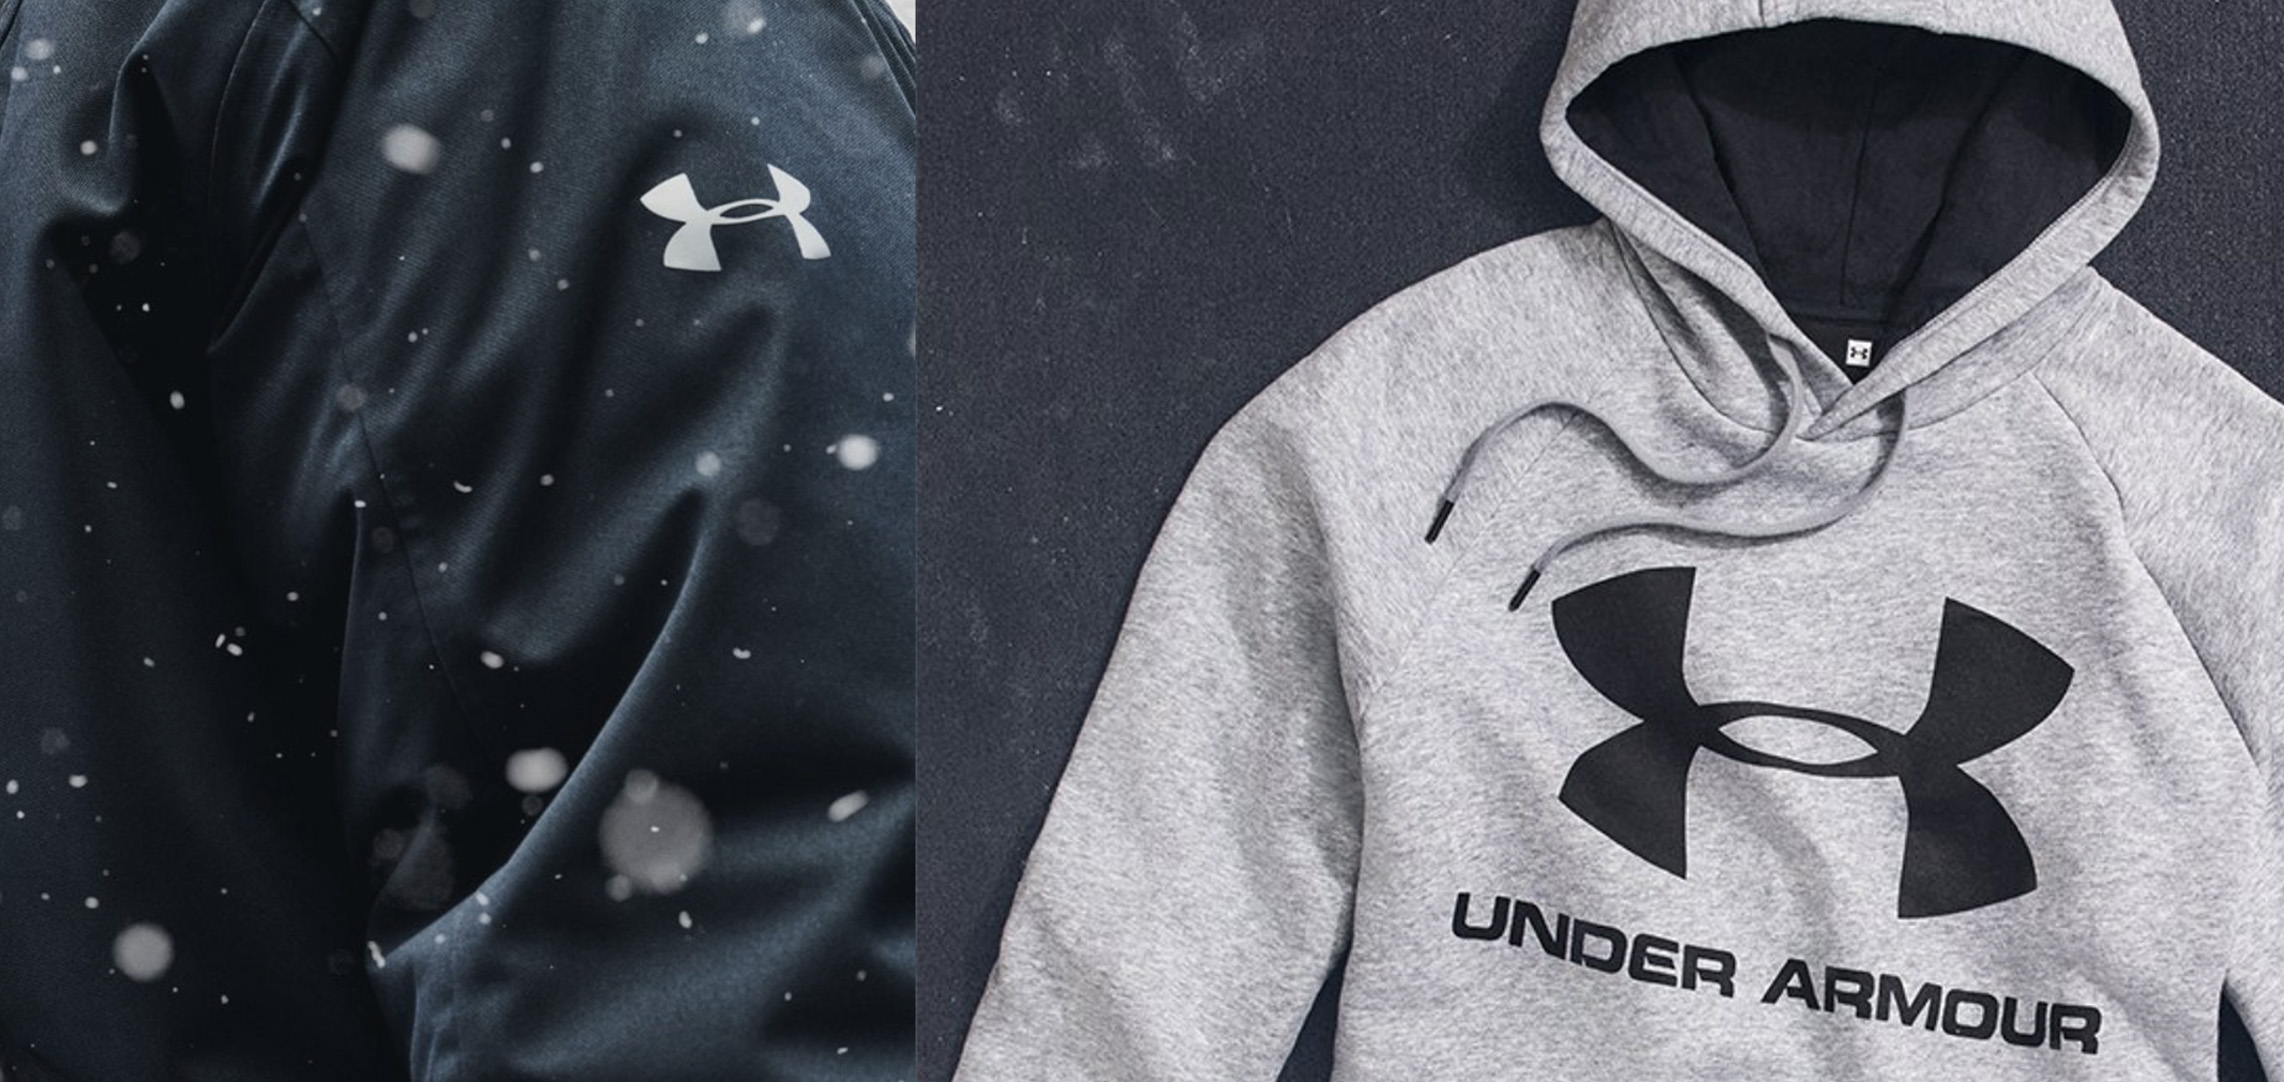 under armour outlet jackets